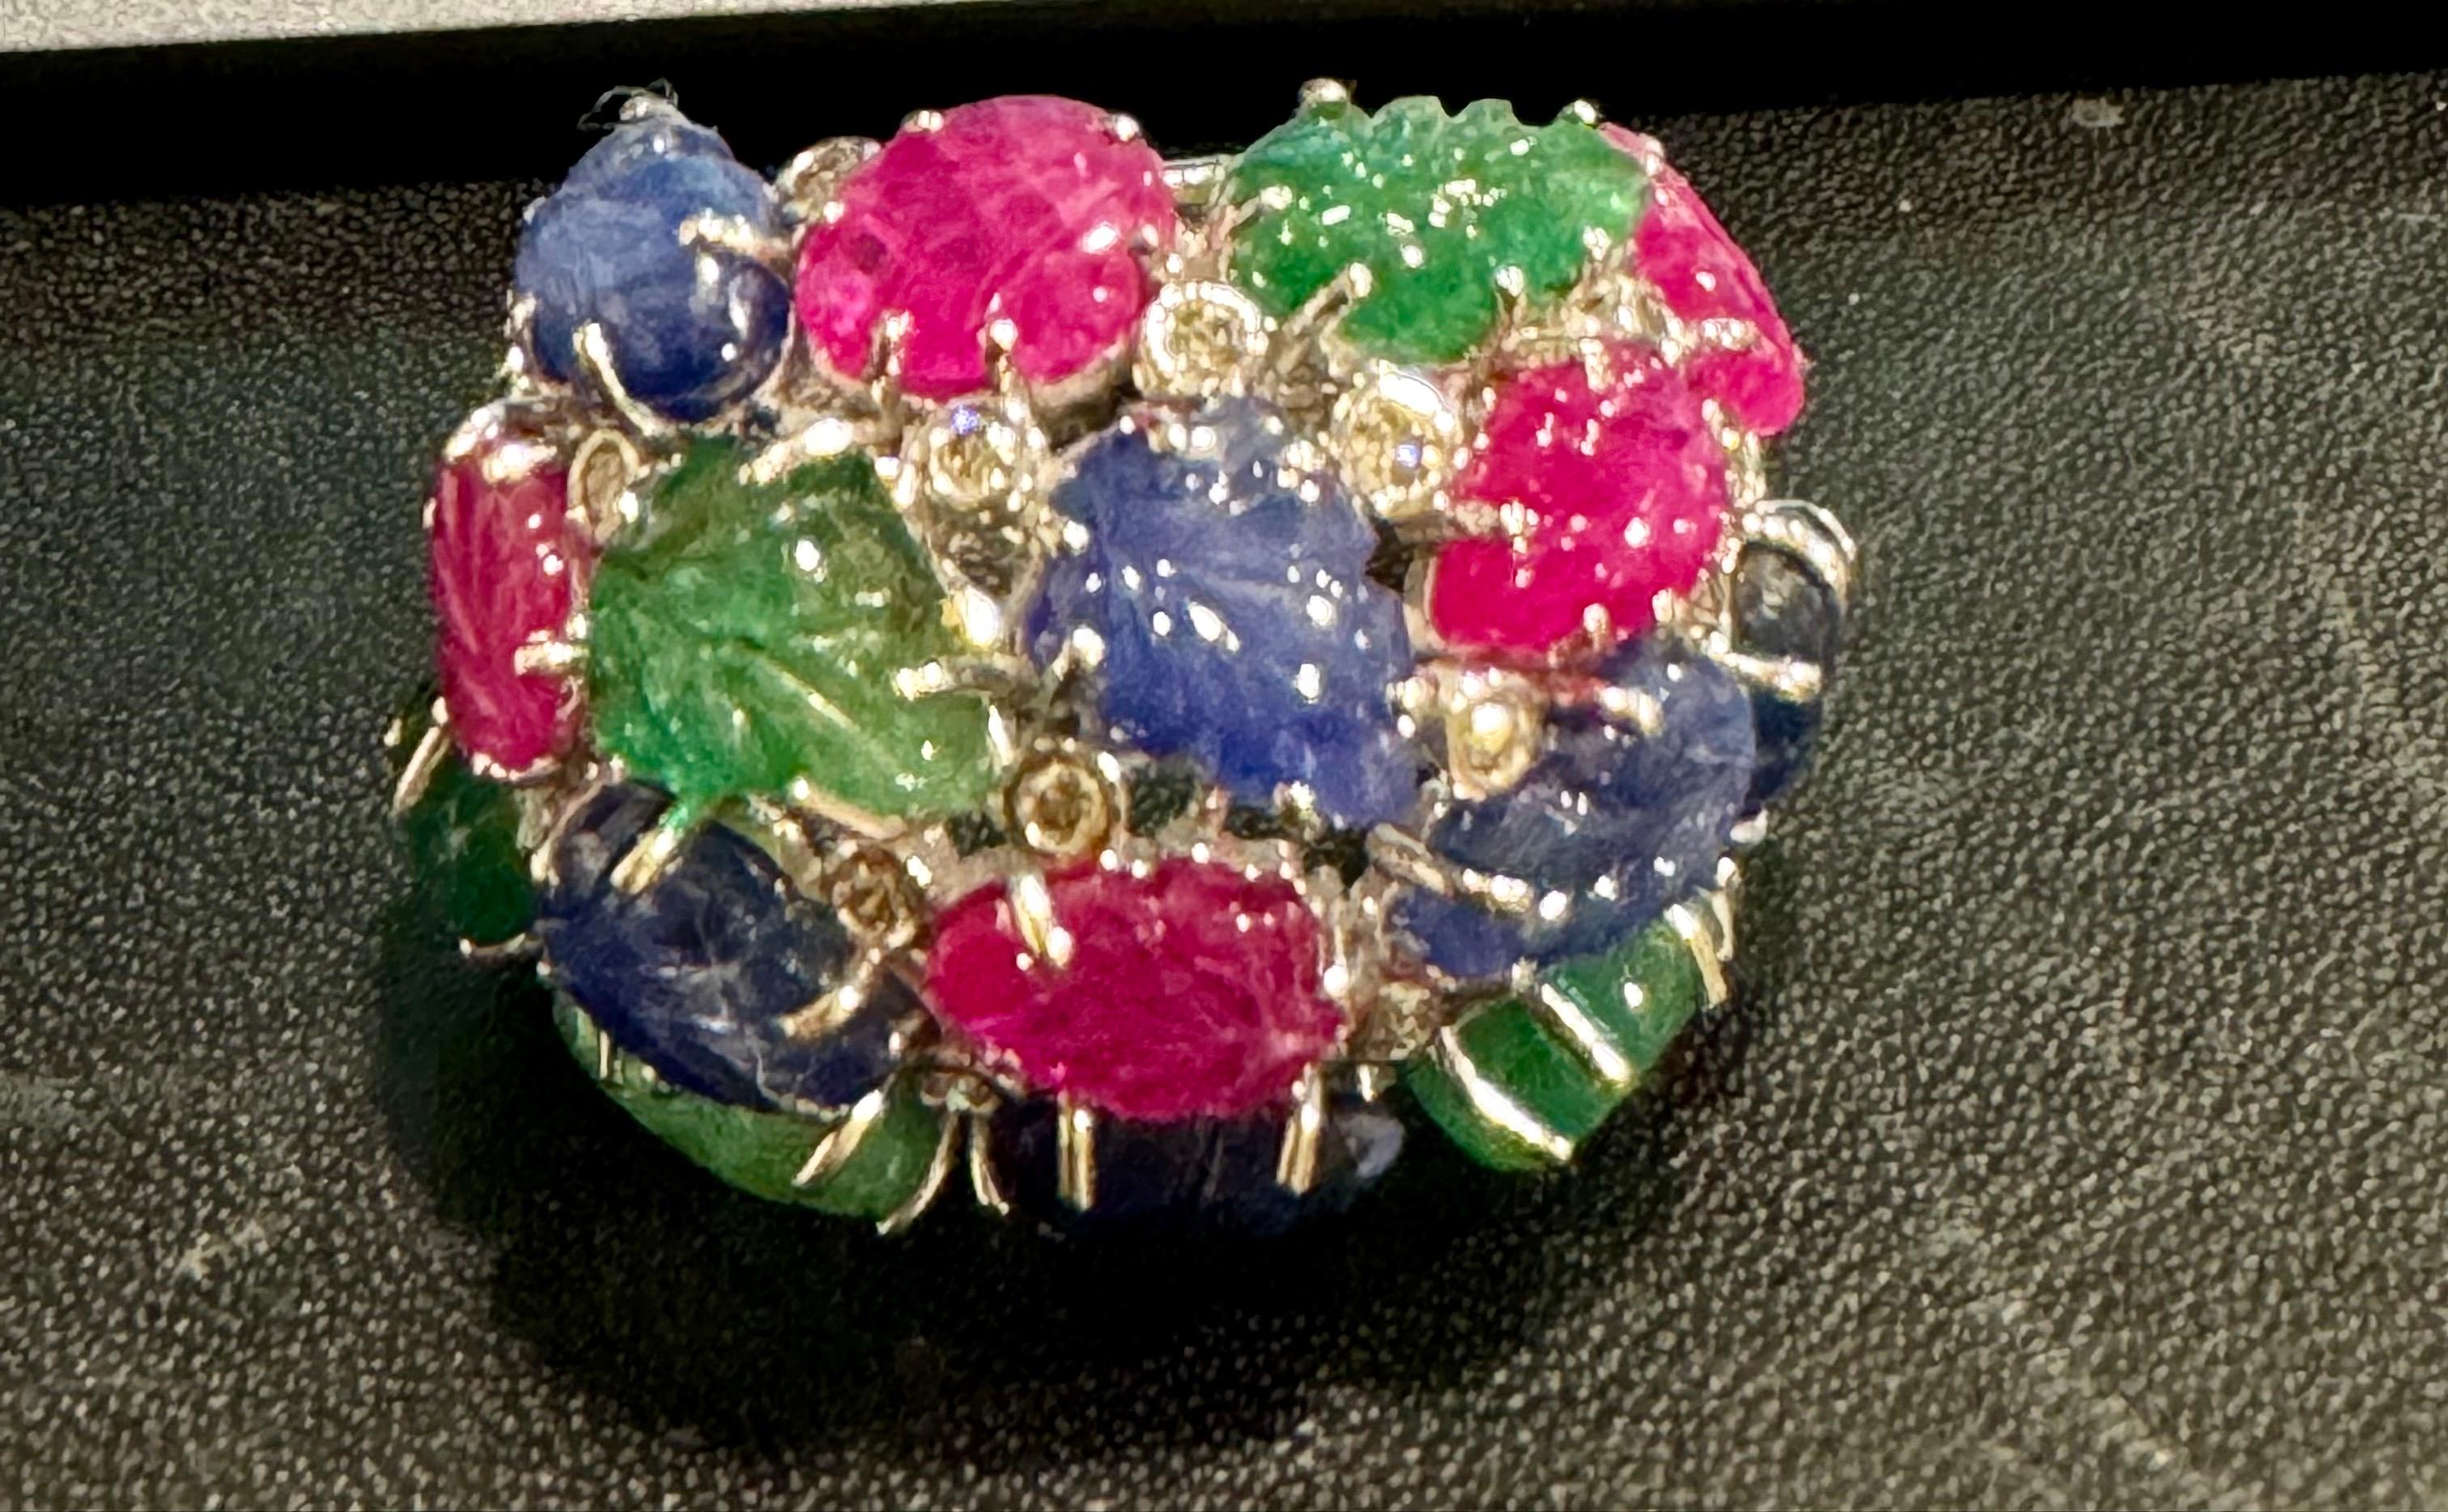 The huge Tutti Frutti 18K Ring, adorned with Emeralds, Rubies, Sapphires, and Diamonds in size 9, is a rare find with exquisite carved gemstone leaves. Dating back to the 1920s-1930s, this type of jewelry was predominantly crafted by renowned